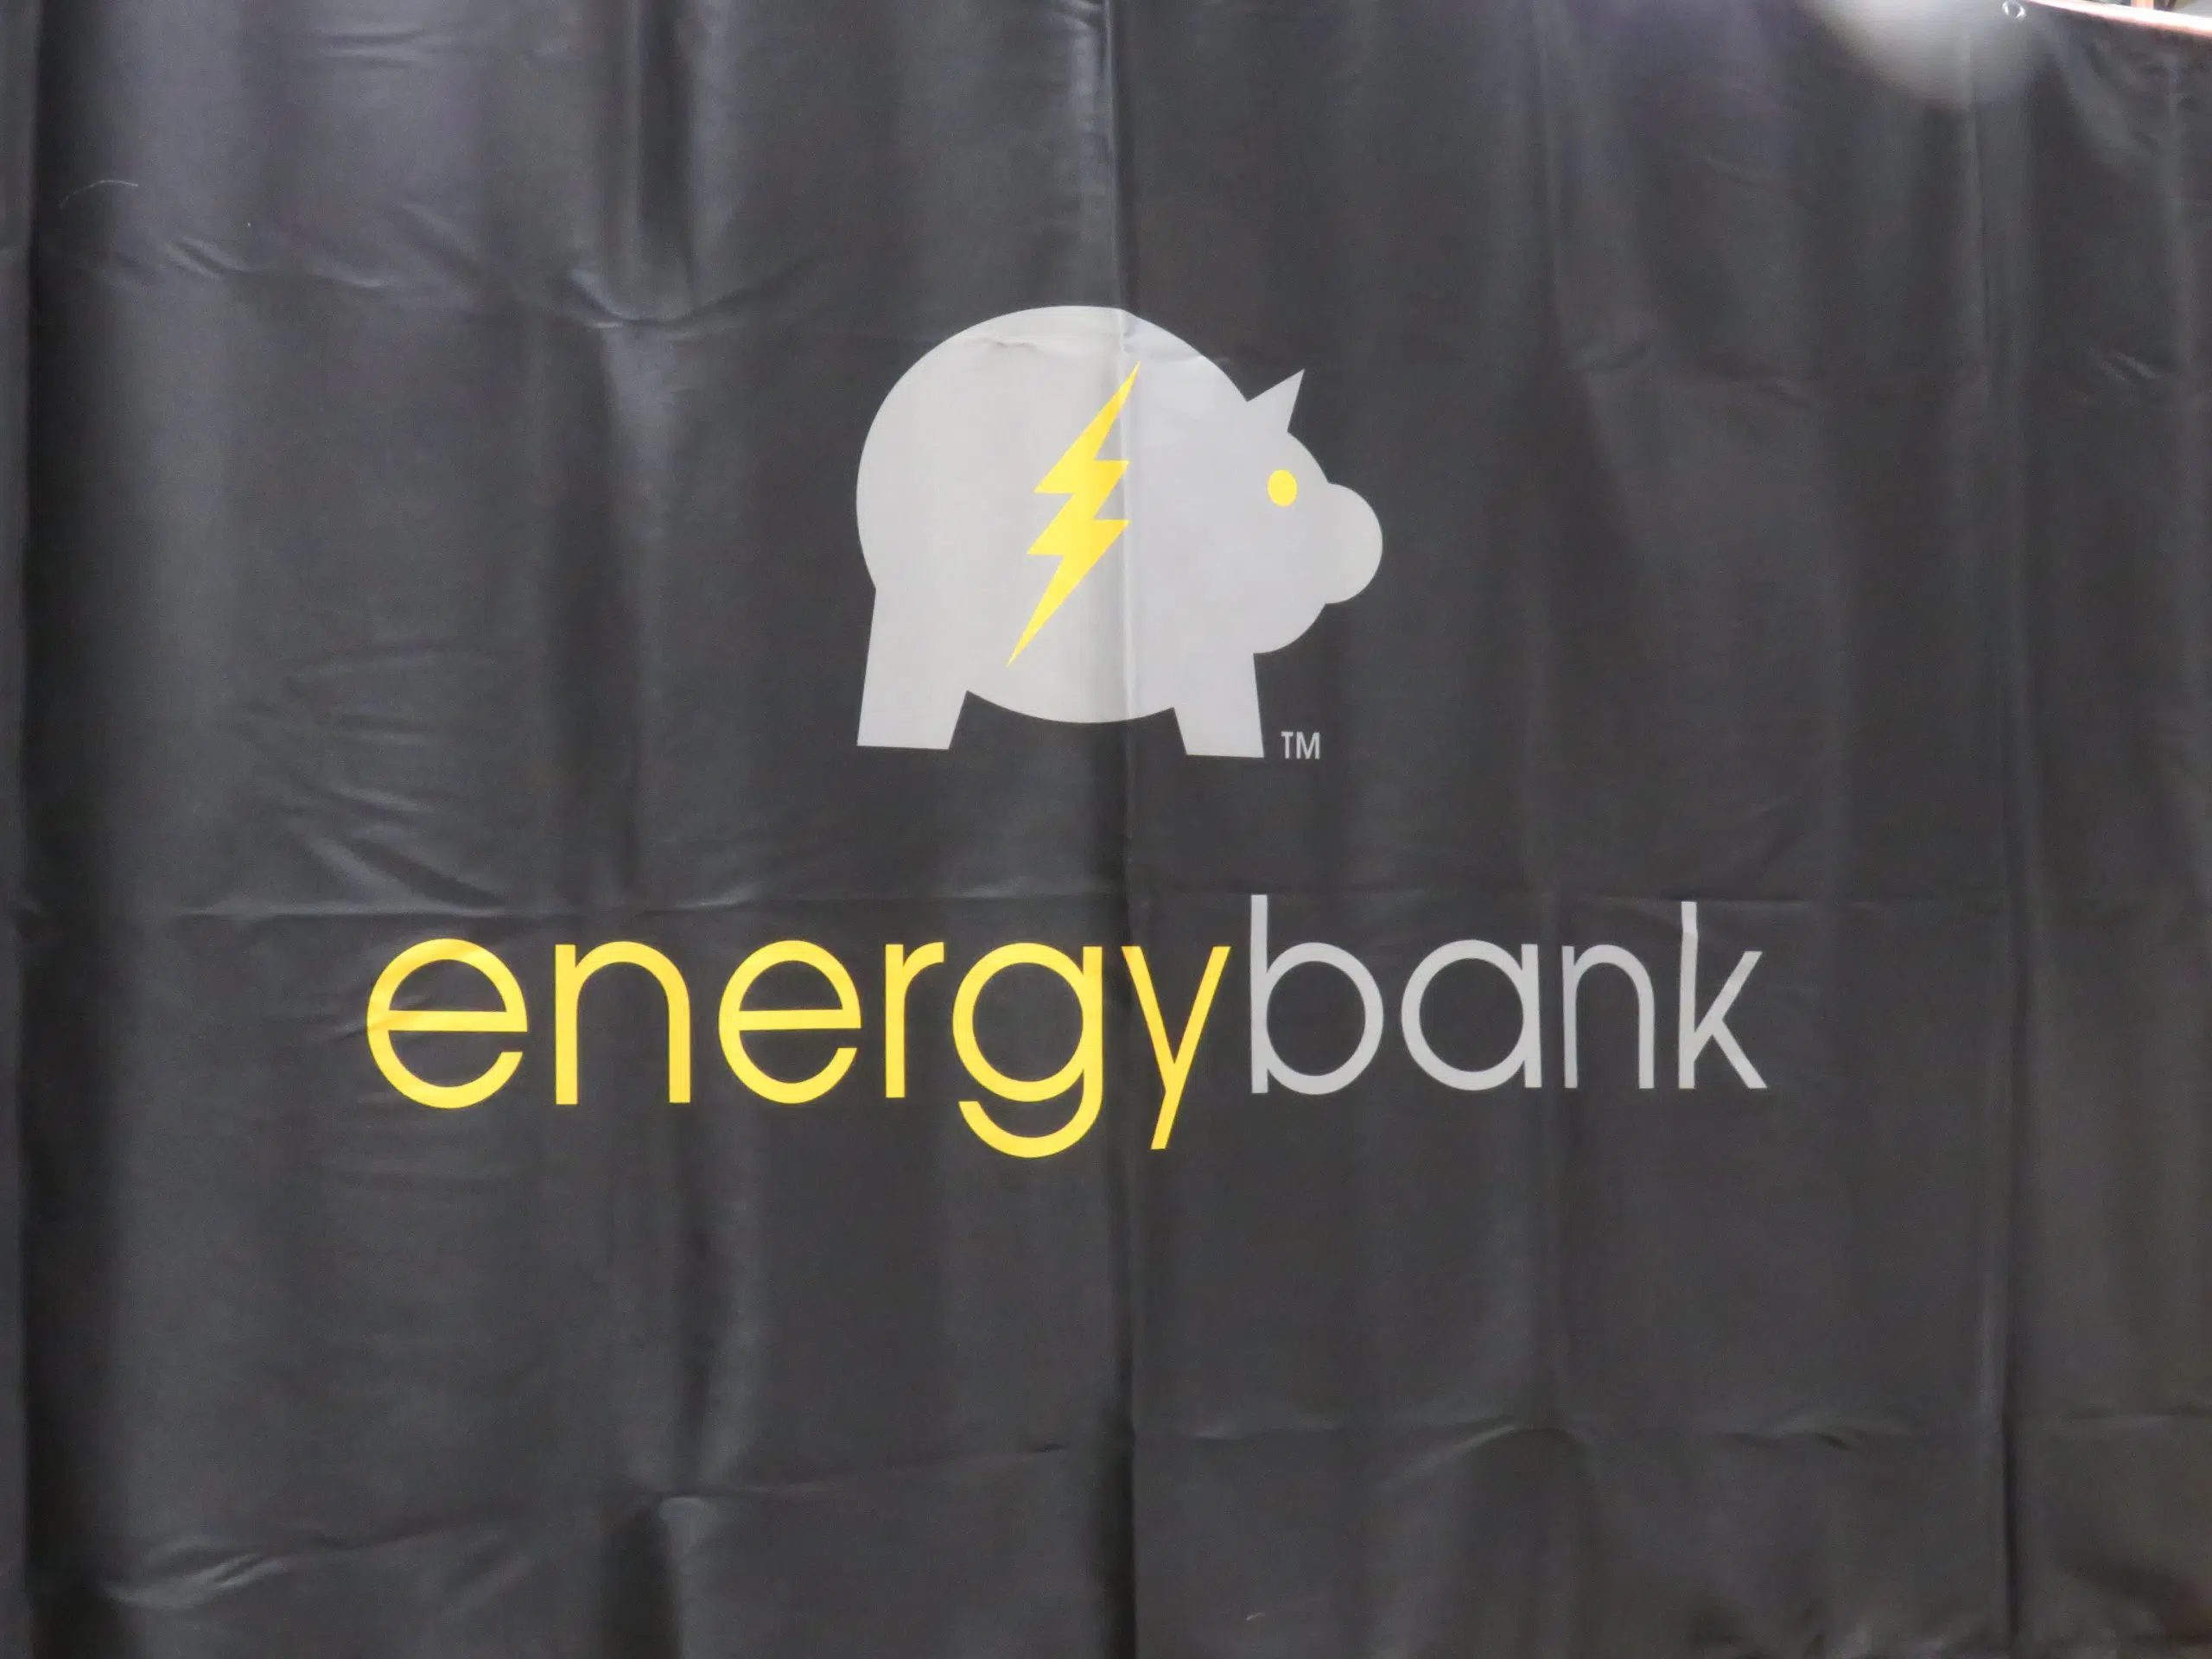 EnergyBank Named as a Stop in the Wisconsin Solar Tour 